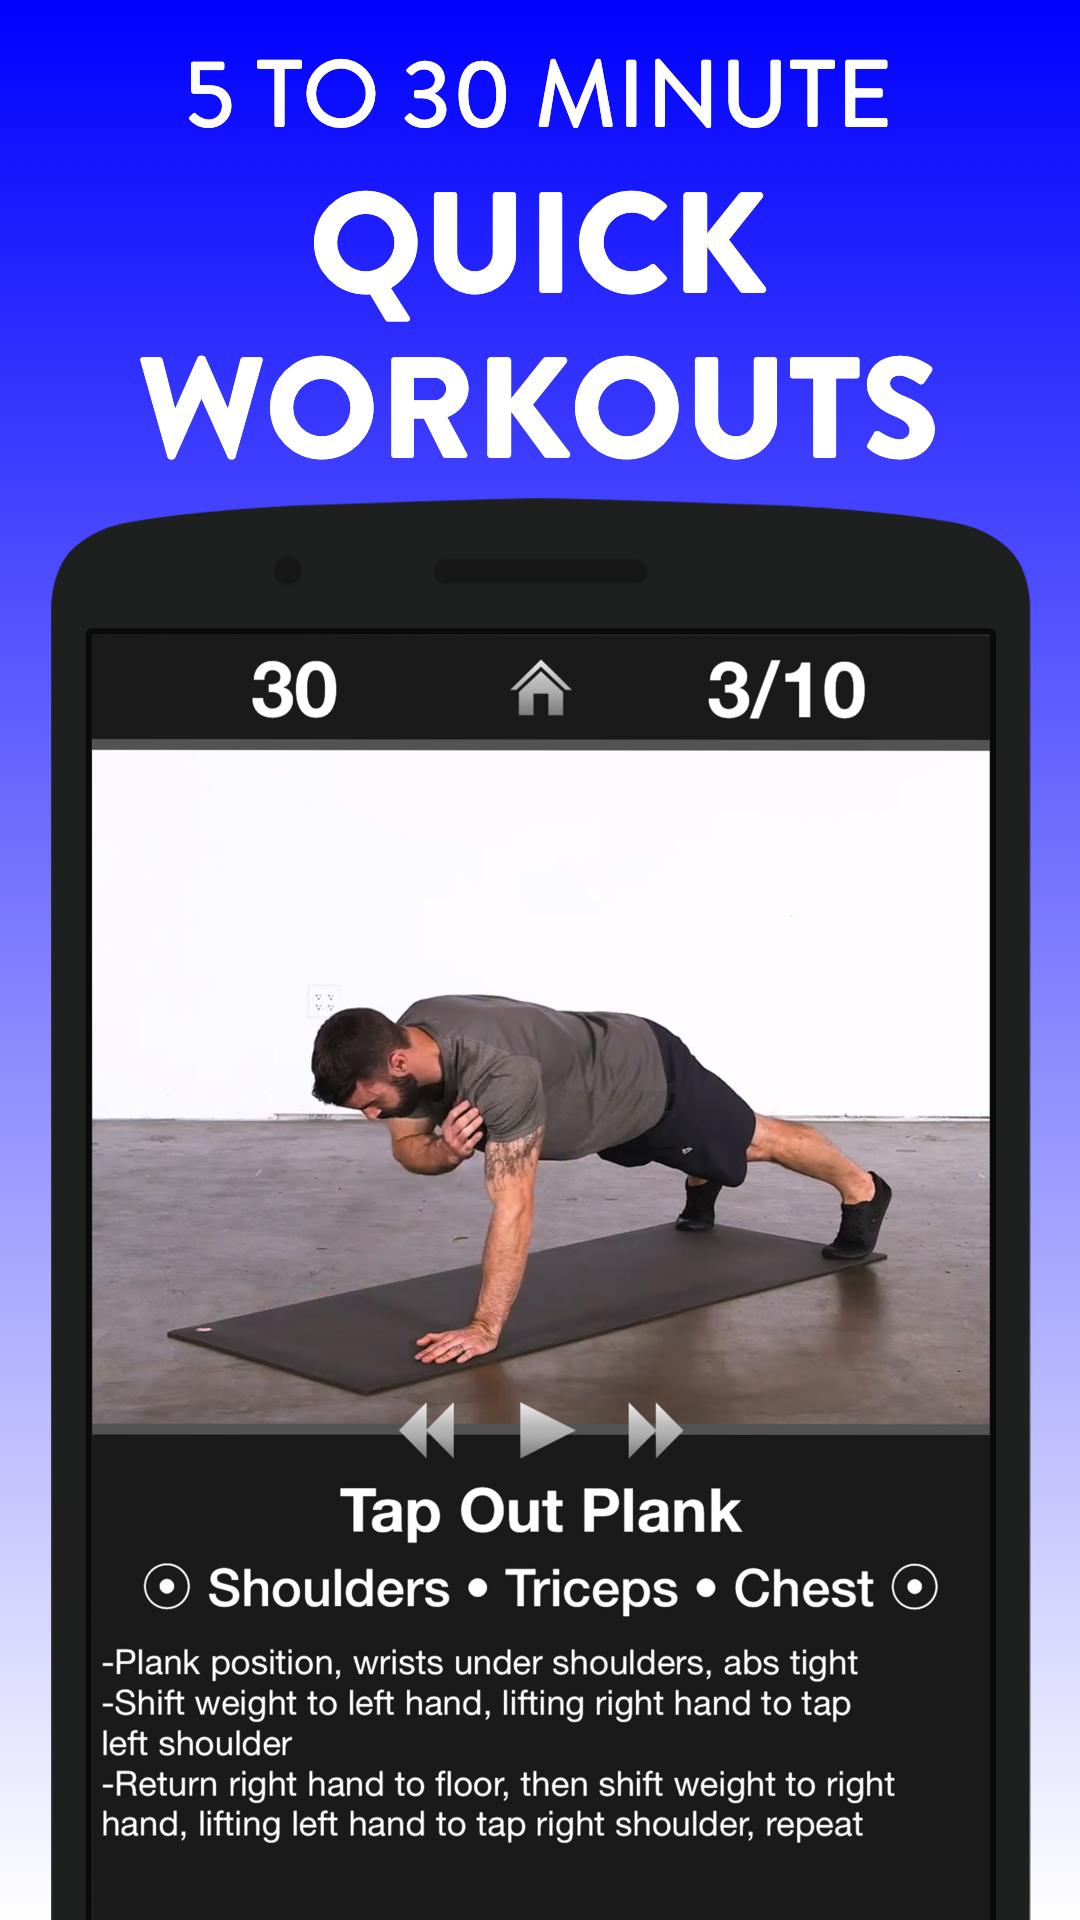 Daily Workouts - Exercise Fitness Workout Trainer 6.12 Screenshot 3